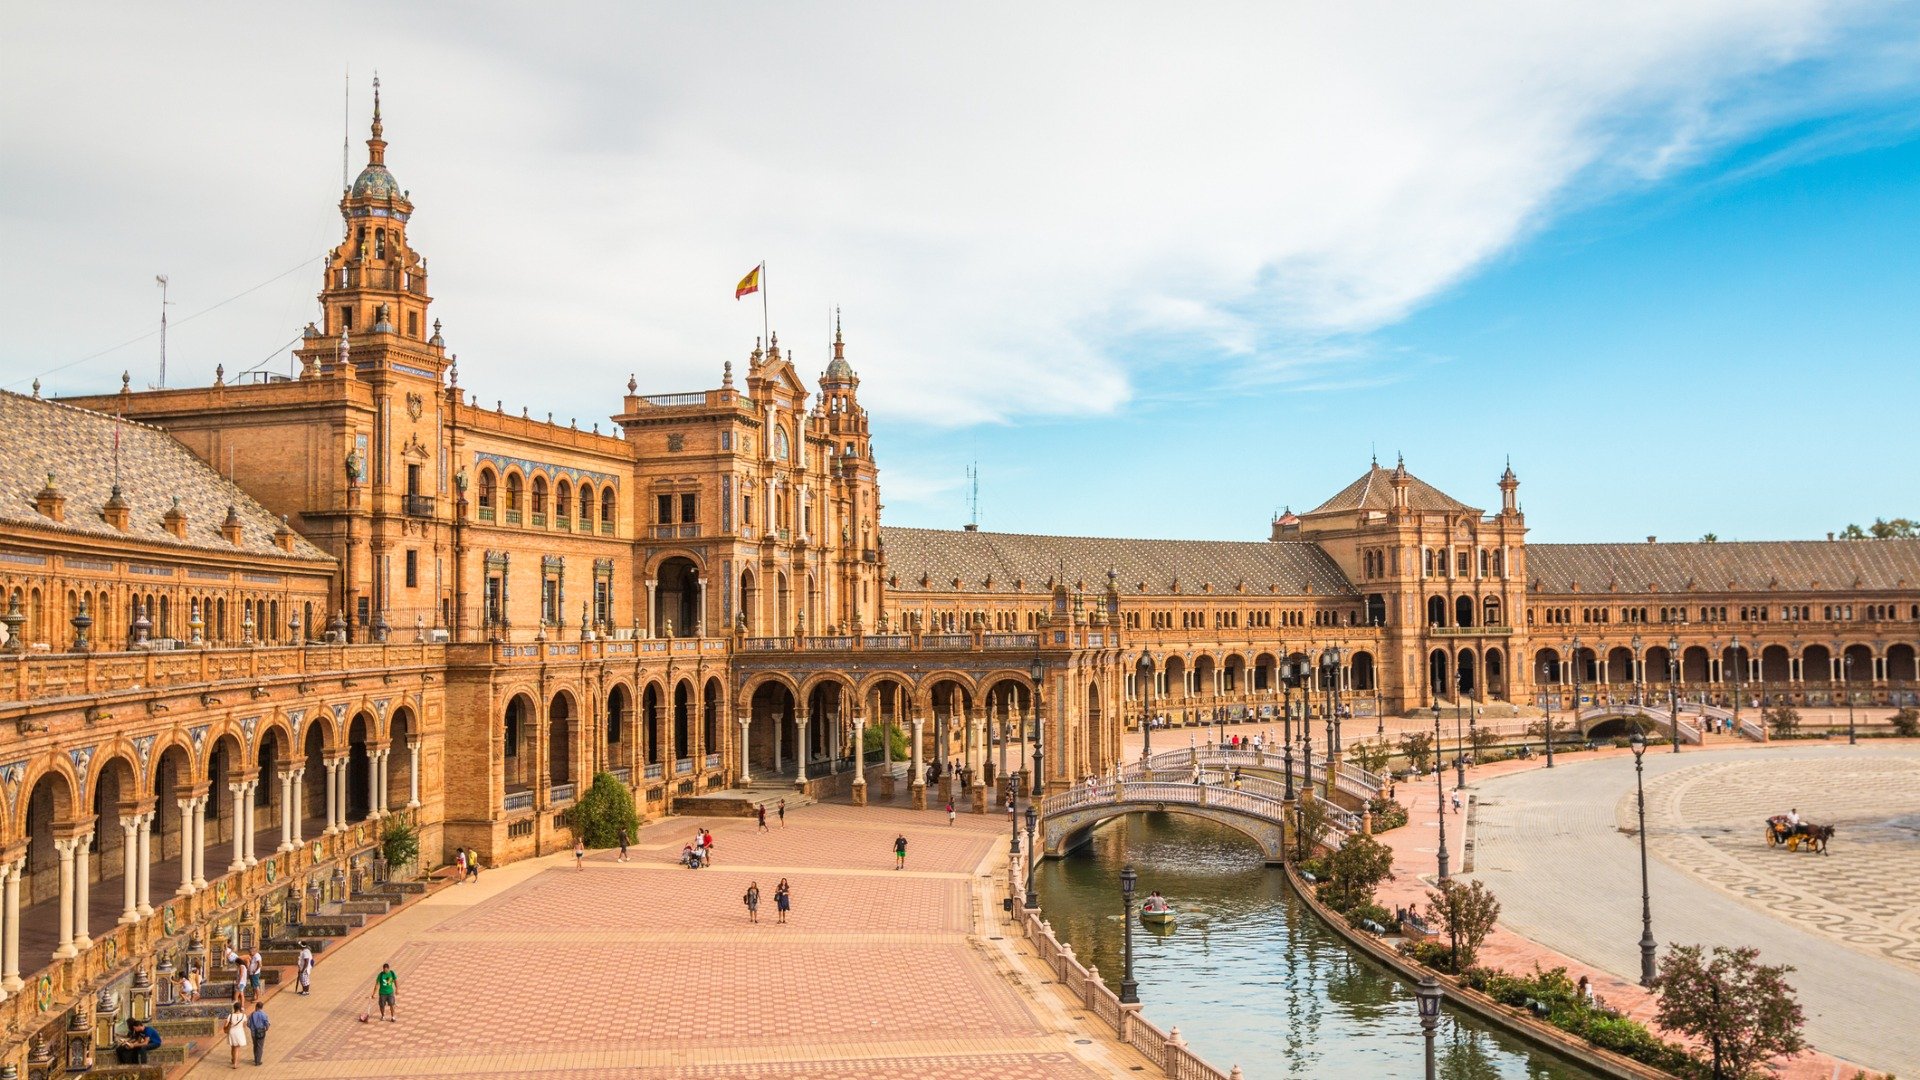 The buildings and canal of Plaza de Espana in Seville, one of the best places to visit in Spain. 